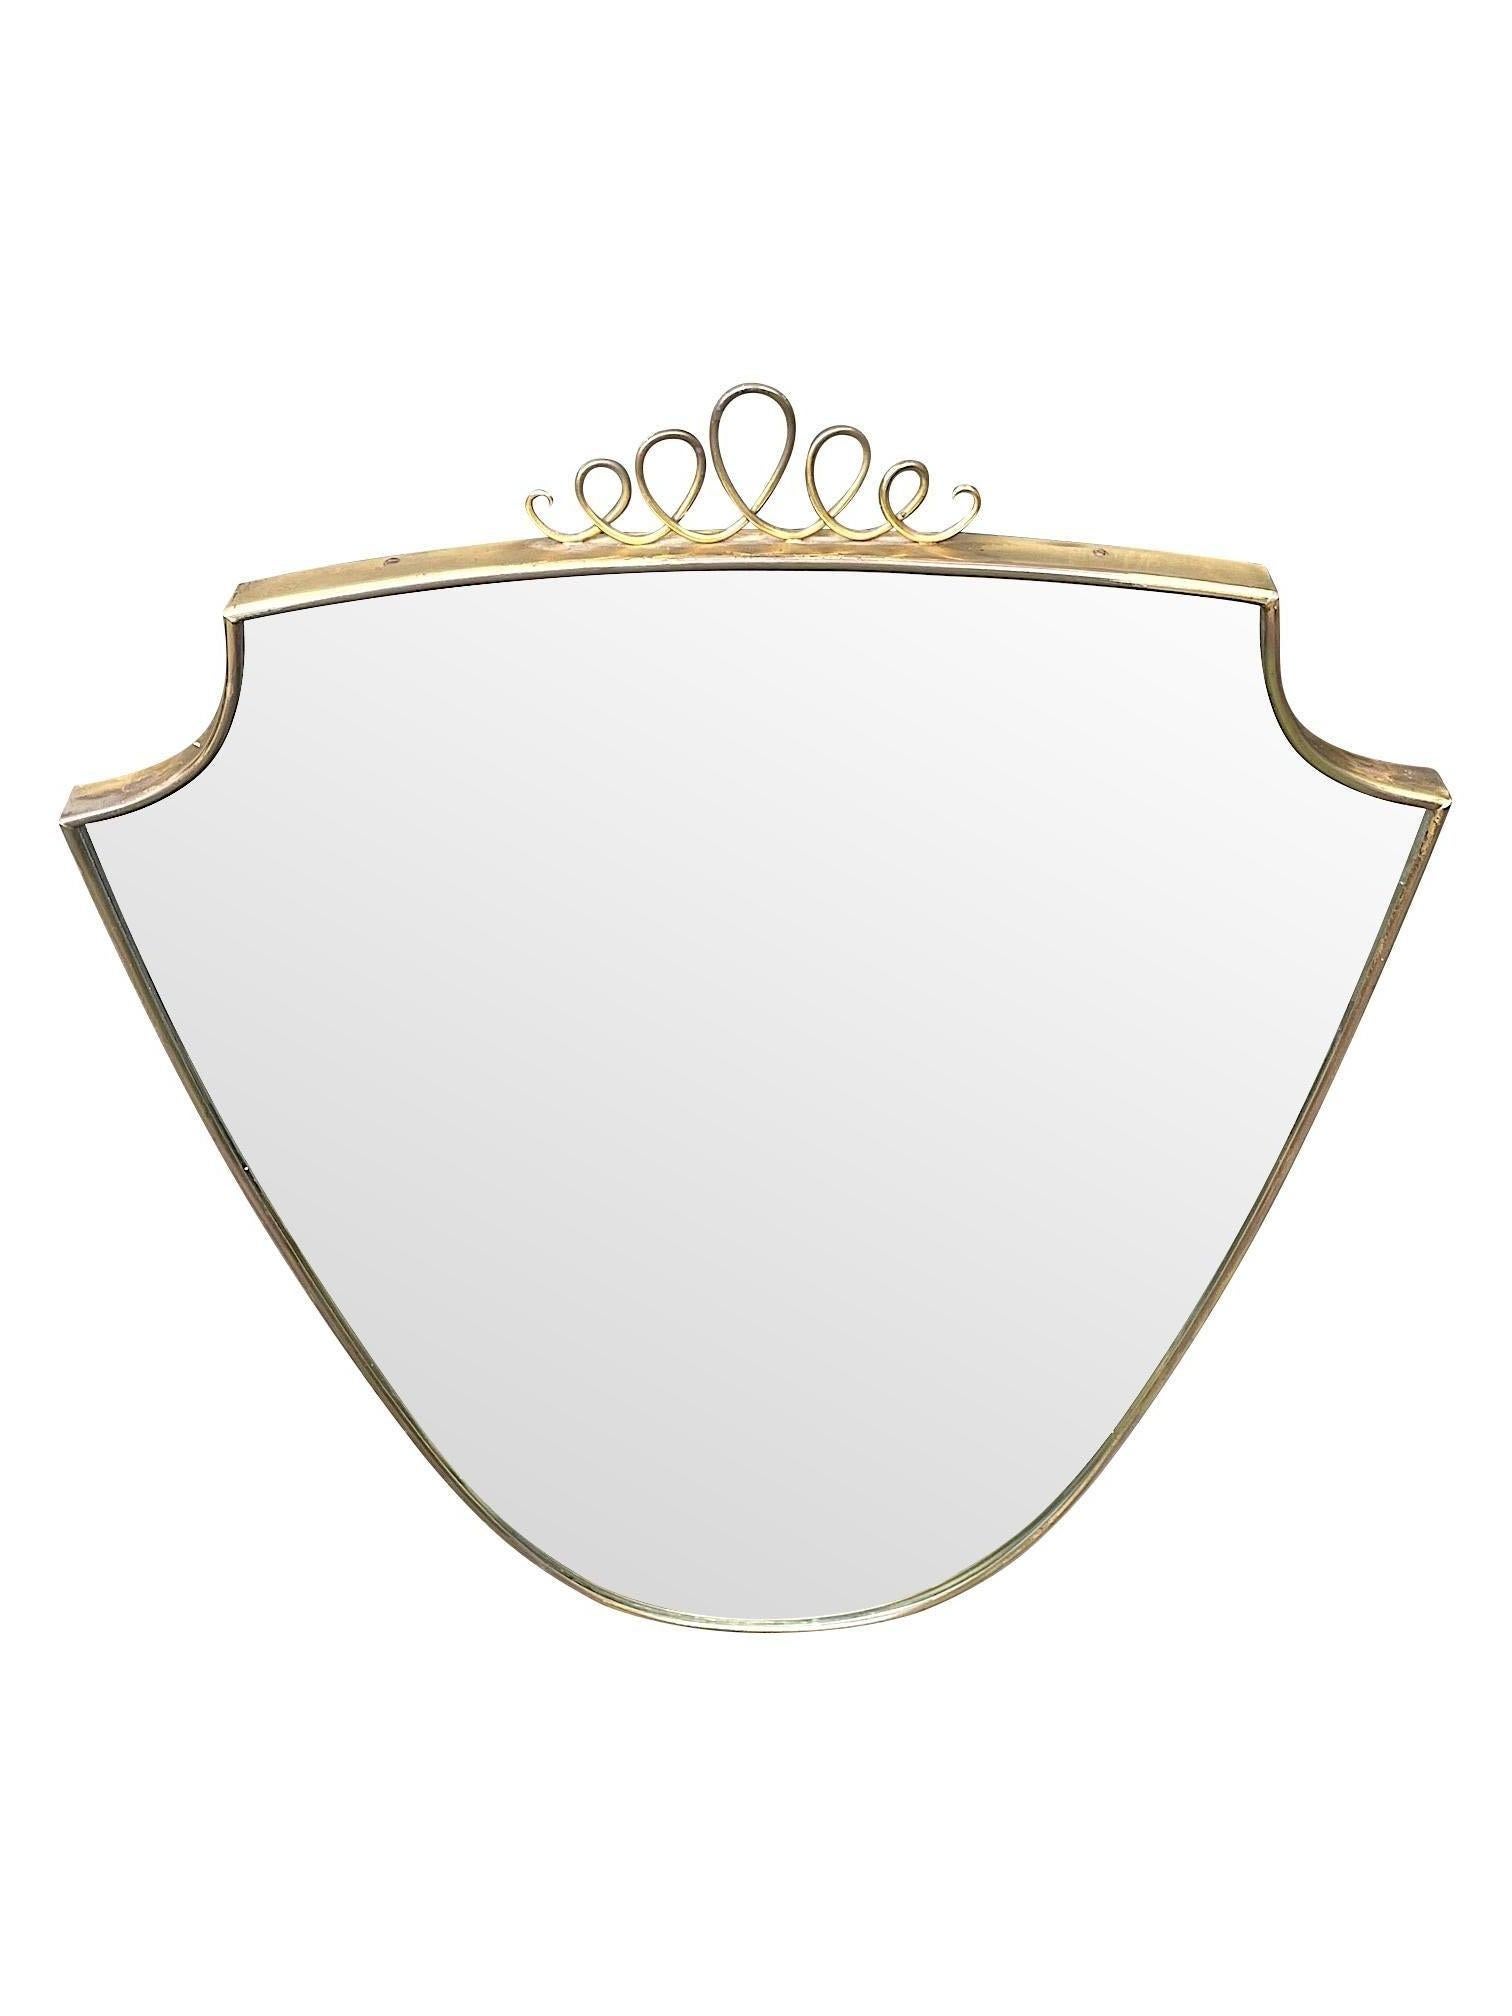 Original 1950s Italian Brass Shield Mirror with Central Decorative Top Detail In Good Condition In London, GB